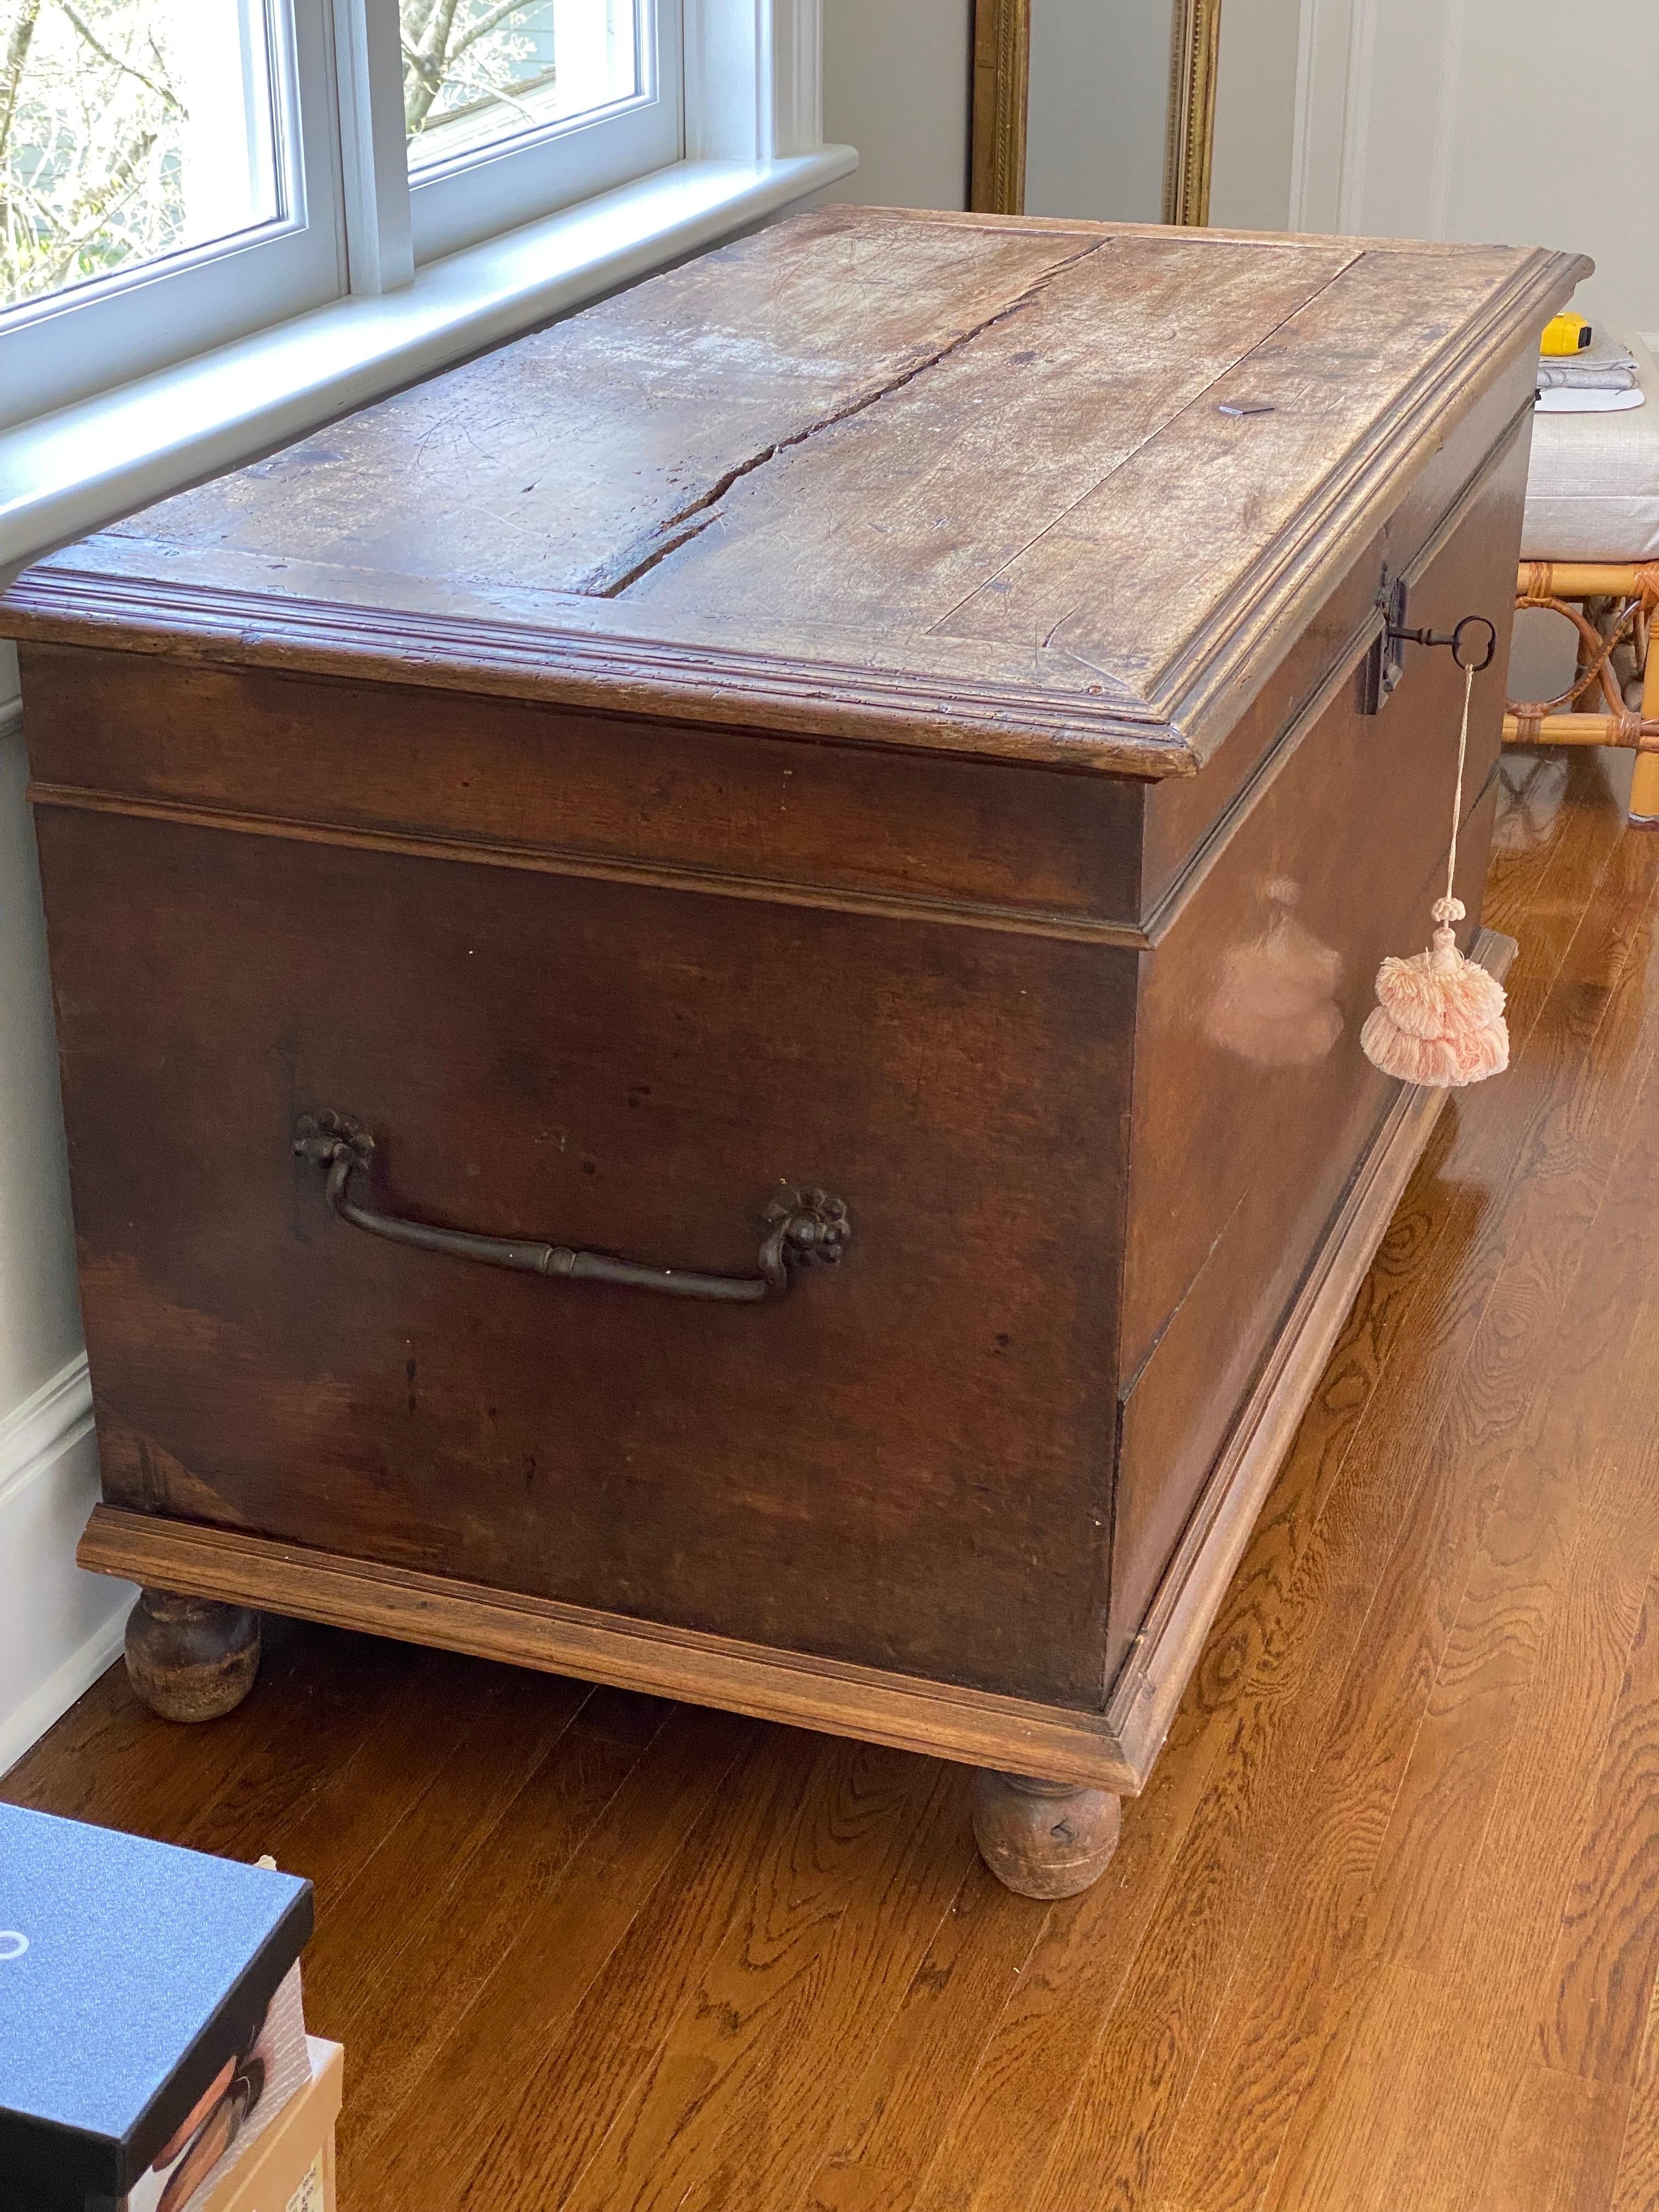 19th Century English oak trunk
A simple rectangular design with iron handles and iron strap hinges on the interior top. Top opens to review lots of storage space inside. Set on bun feet.
Some cracks and separation, wear to finish throughout and